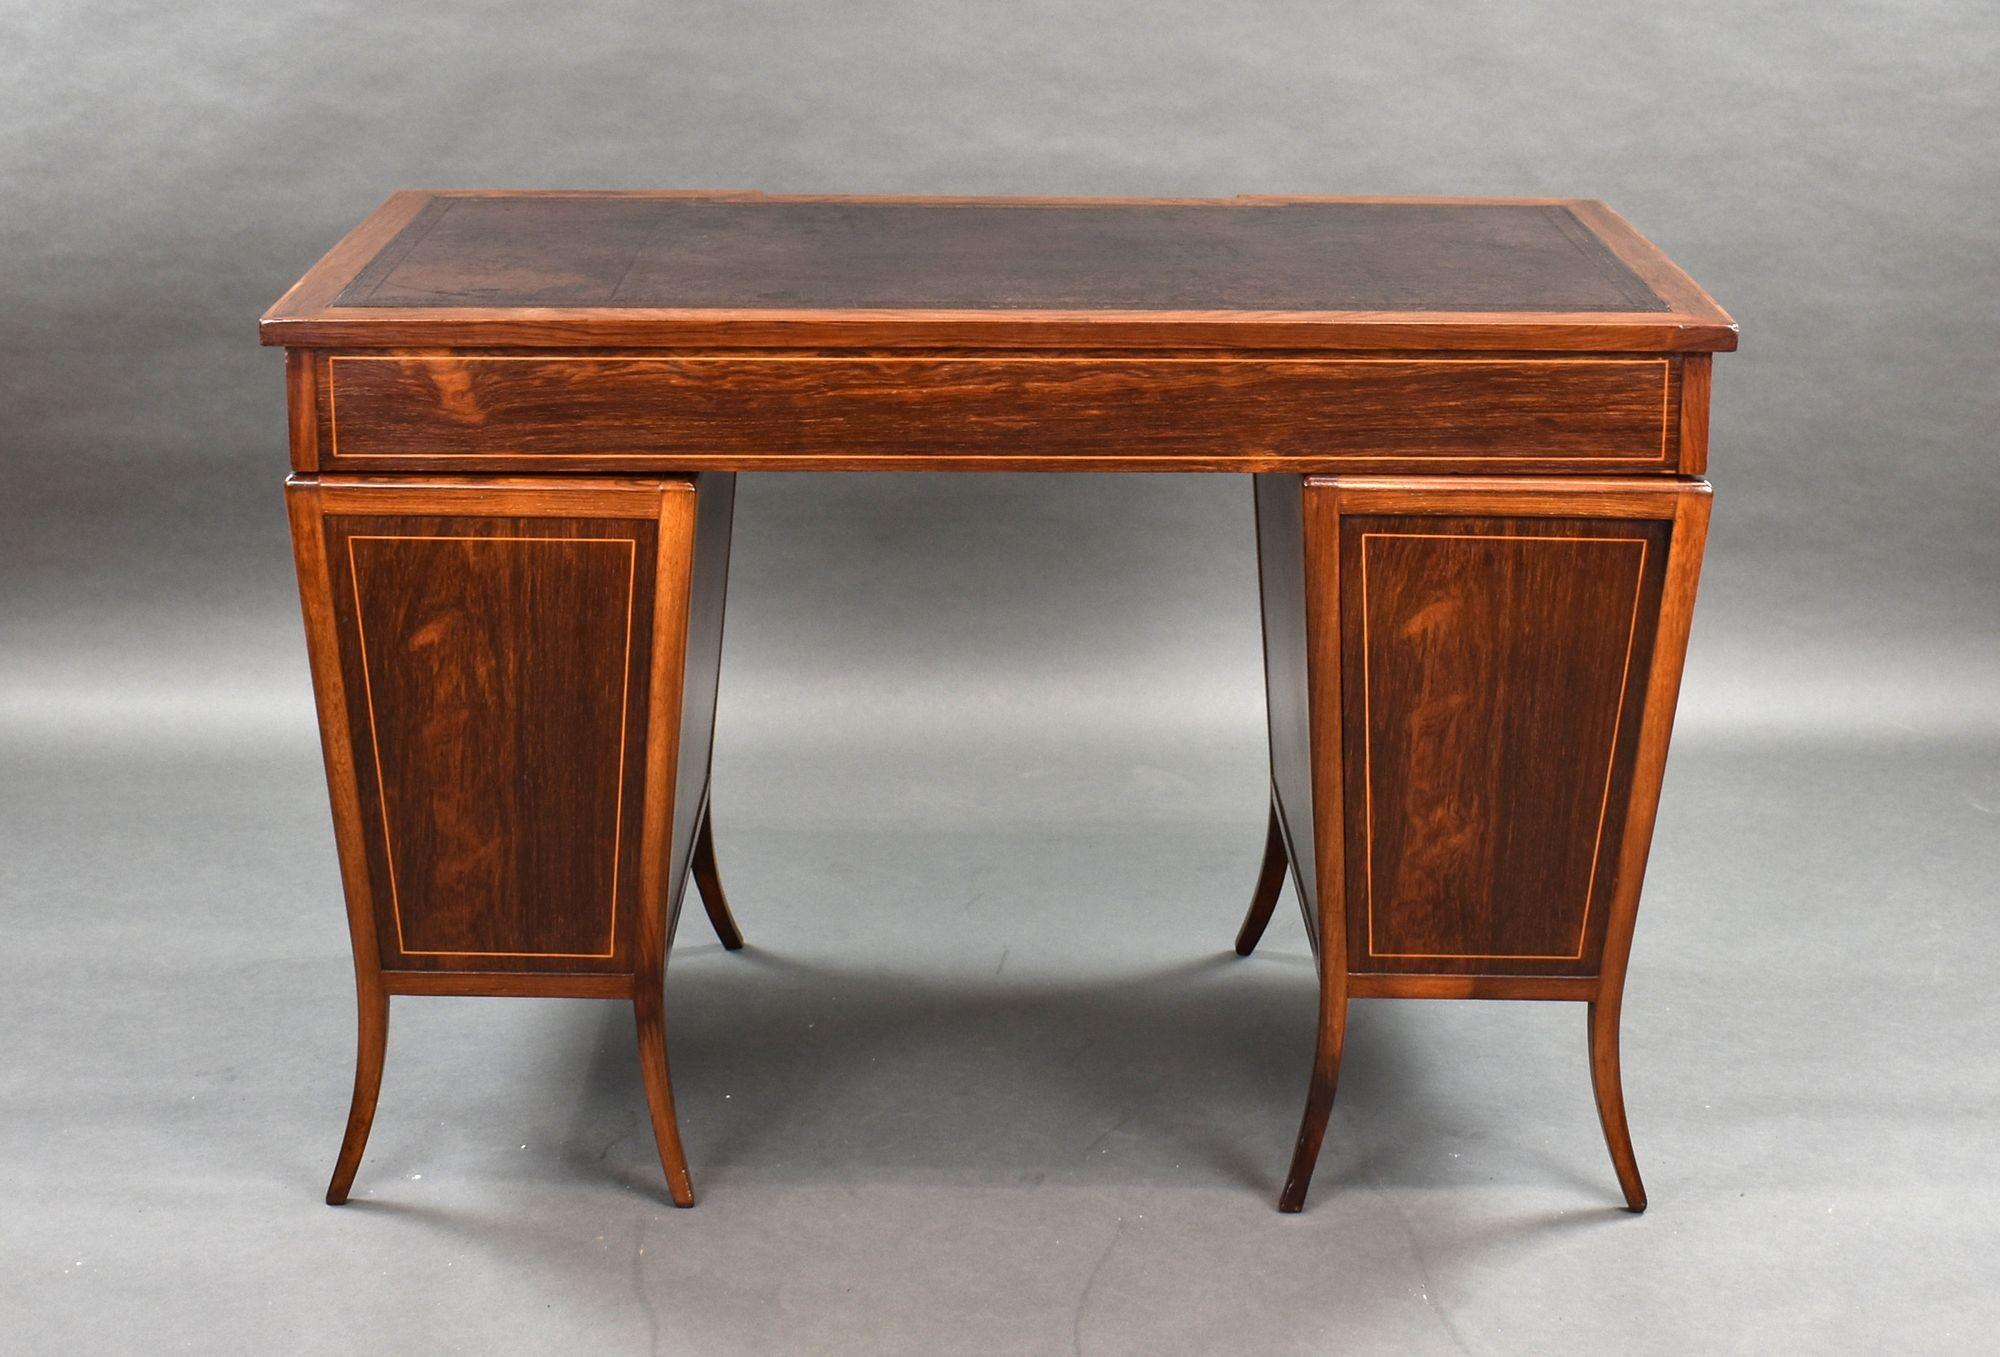 For sale is a good quality Victorian rosewood pedestal desk, having a leather inset top, above three drawers each with brass handles. The top fits on to two tapered pedestals each with a further three drawers, raised on splayed legs. The desk